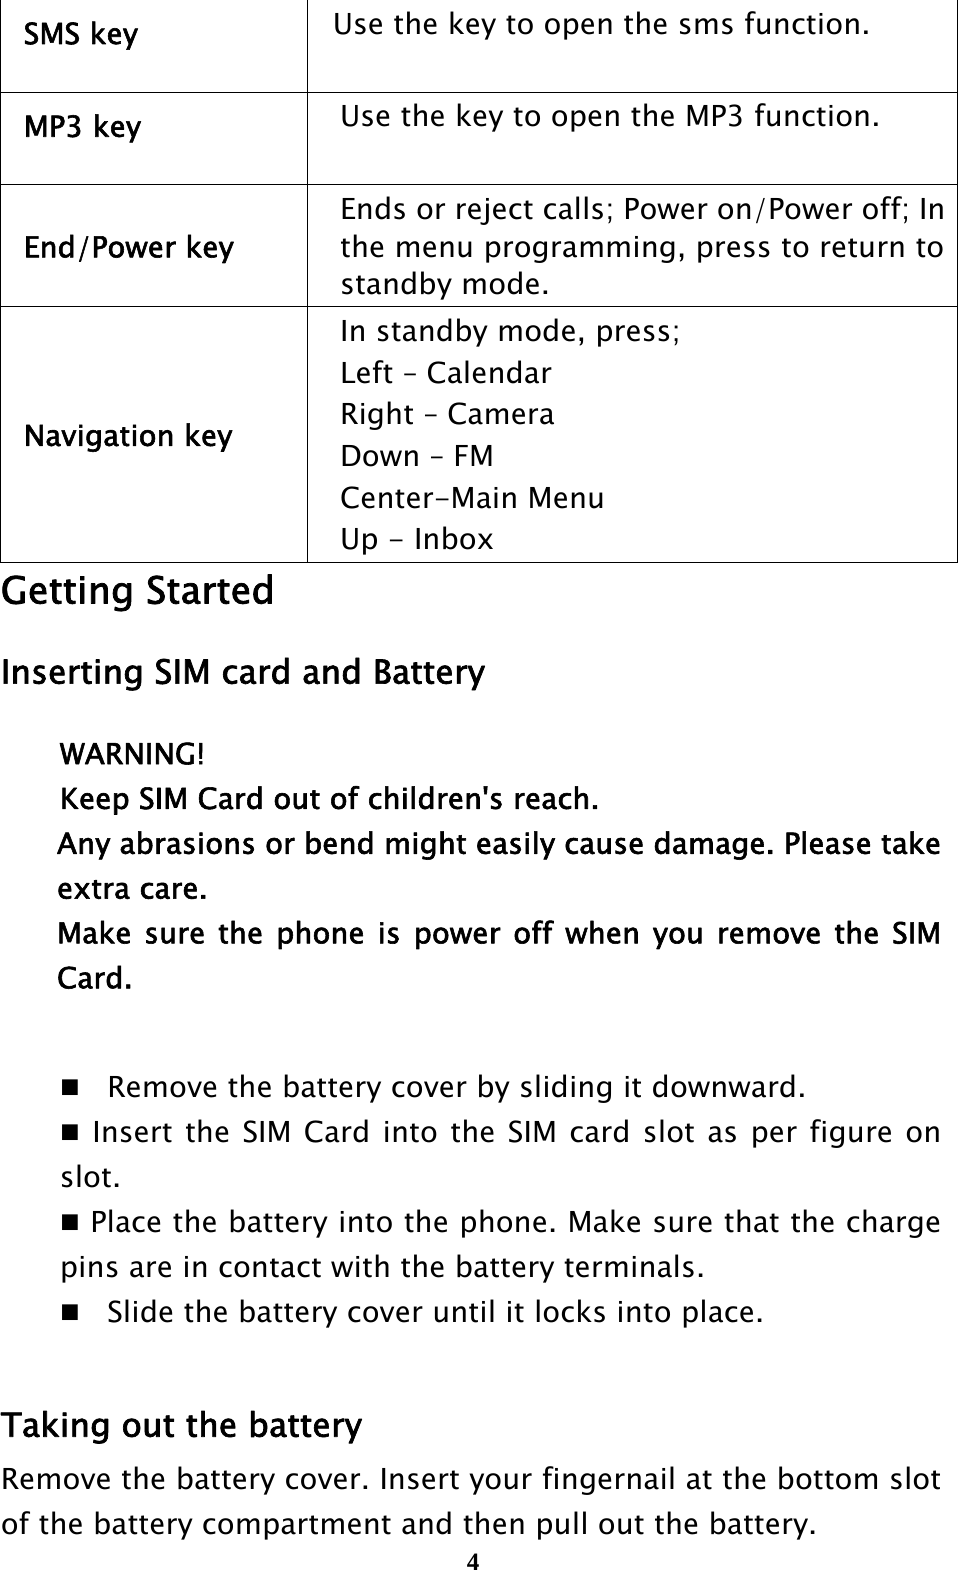  4SMS key    Use the key to open the sms function. MP3 key  Use the key to open the MP3 function. End/Power key Ends or reject calls; Power on/Power off; In the menu programming, press to return to standby mode. Navigation key In standby mode, press; Left – Calendar Right – Camera Down – FM Center-Main Menu Up - Inbox Getting Started Inserting SIM card and Battery WARNING! Keep SIM Card out of children&apos;s reach. Any abrasions or bend might easily cause damage. Please take extra care. Make sure the phone is power off when you remove the SIM Card.  Remove the battery cover by sliding it downward.  Insert the SIM Card into the SIM card slot as per figure on slot.  Place the battery into the phone. Make sure that the charge pins are in contact with the battery terminals. Slide the battery cover until it locks into place.  Taking out the battery Remove the battery cover. Insert your fingernail at the bottom slot of the battery compartment and then pull out the battery. 